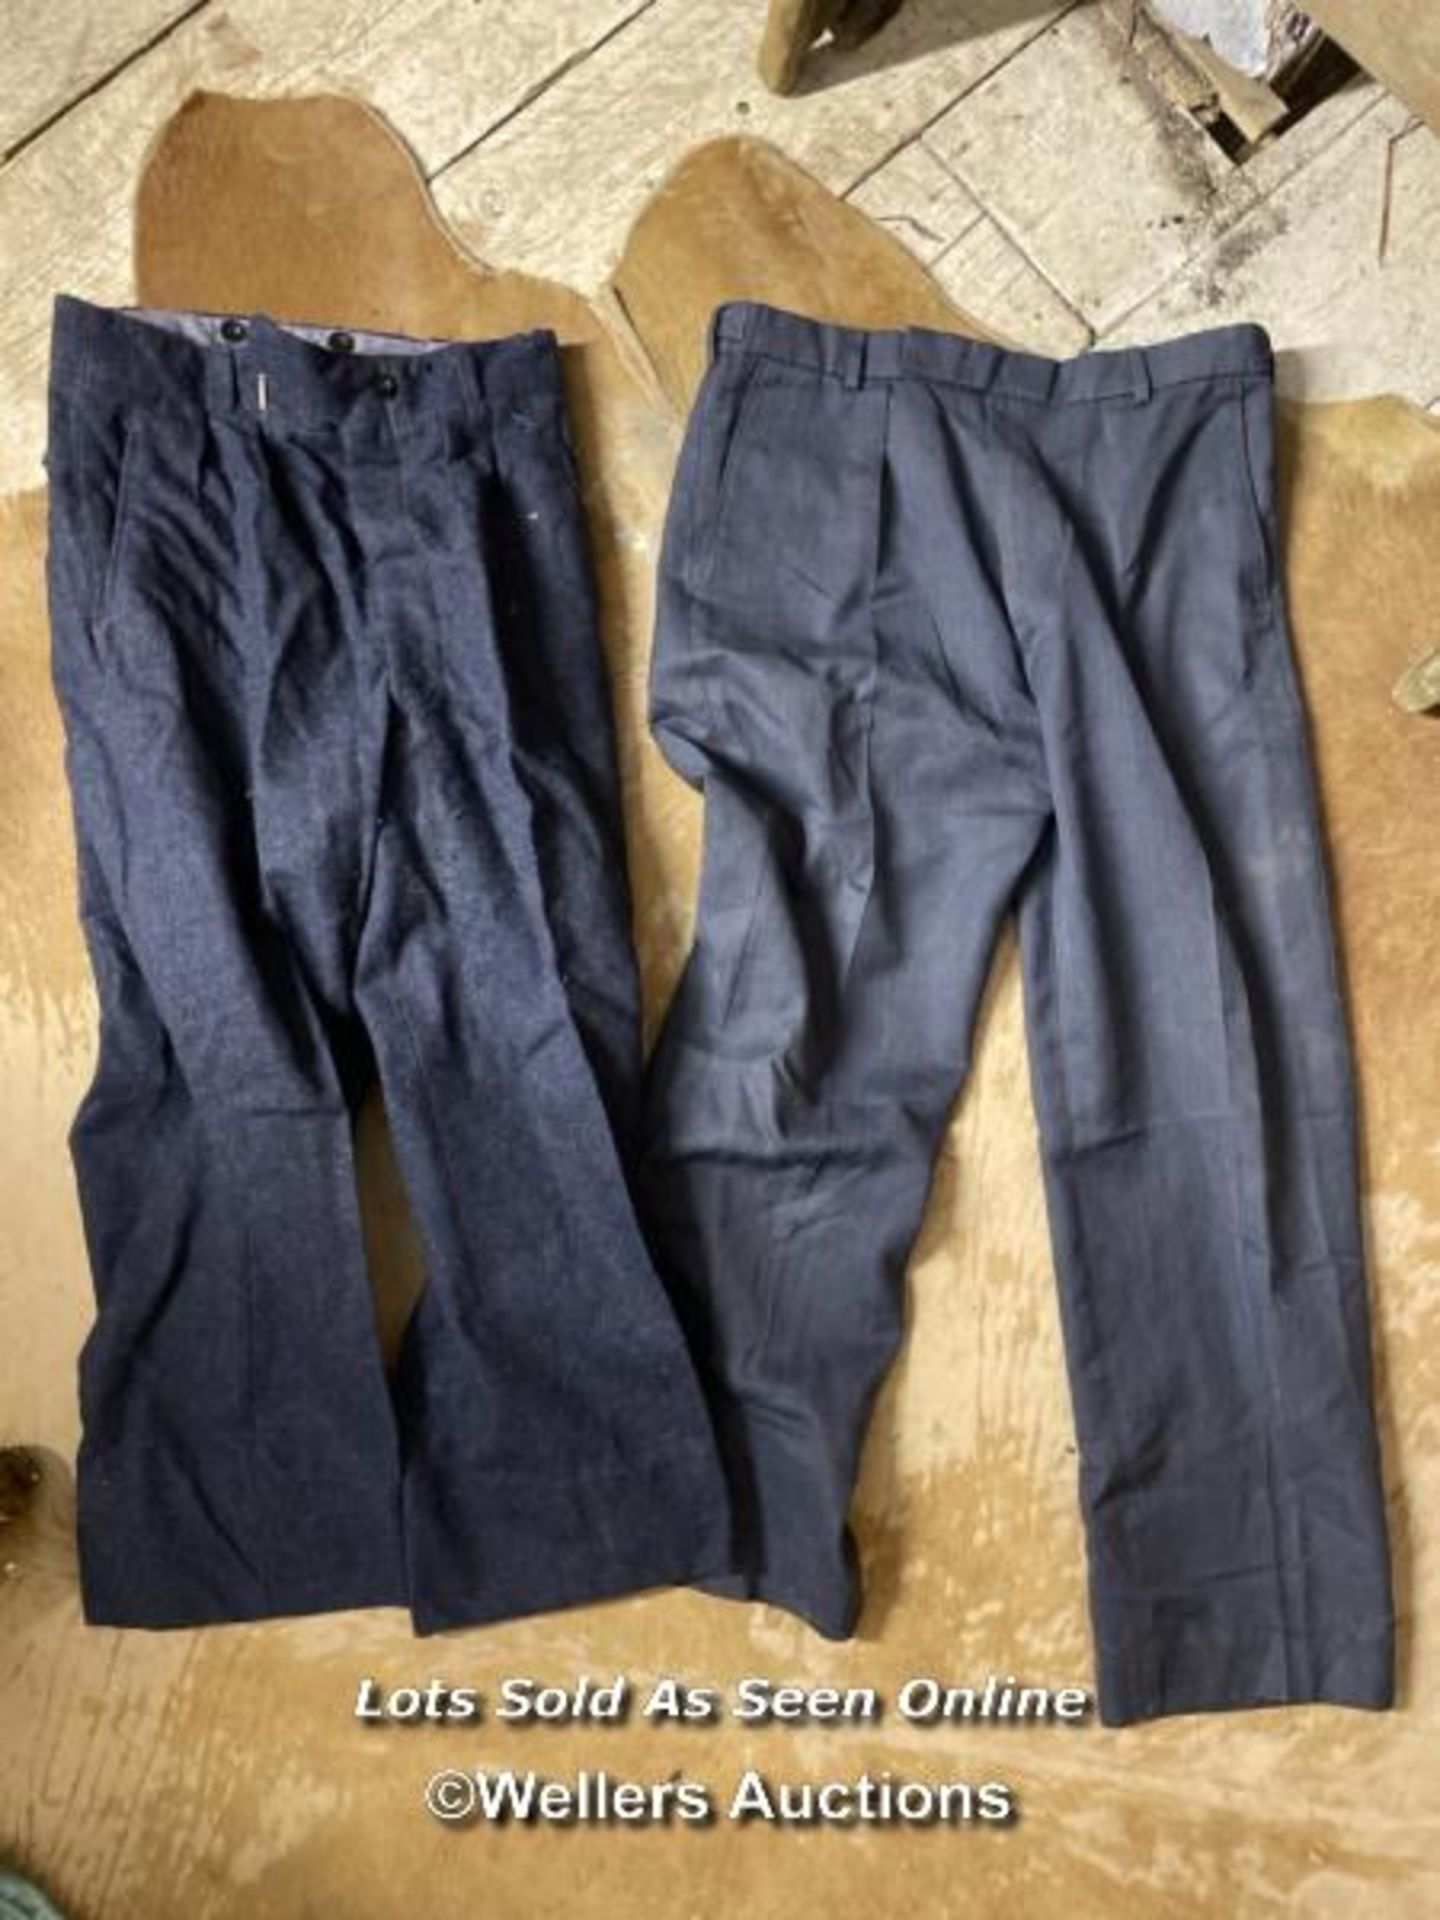 THREE R.A.F. JACKETS, AND TWO PAIRS OF TROUSERS (SEE IMAGES FOR DETAIL) - Image 5 of 6